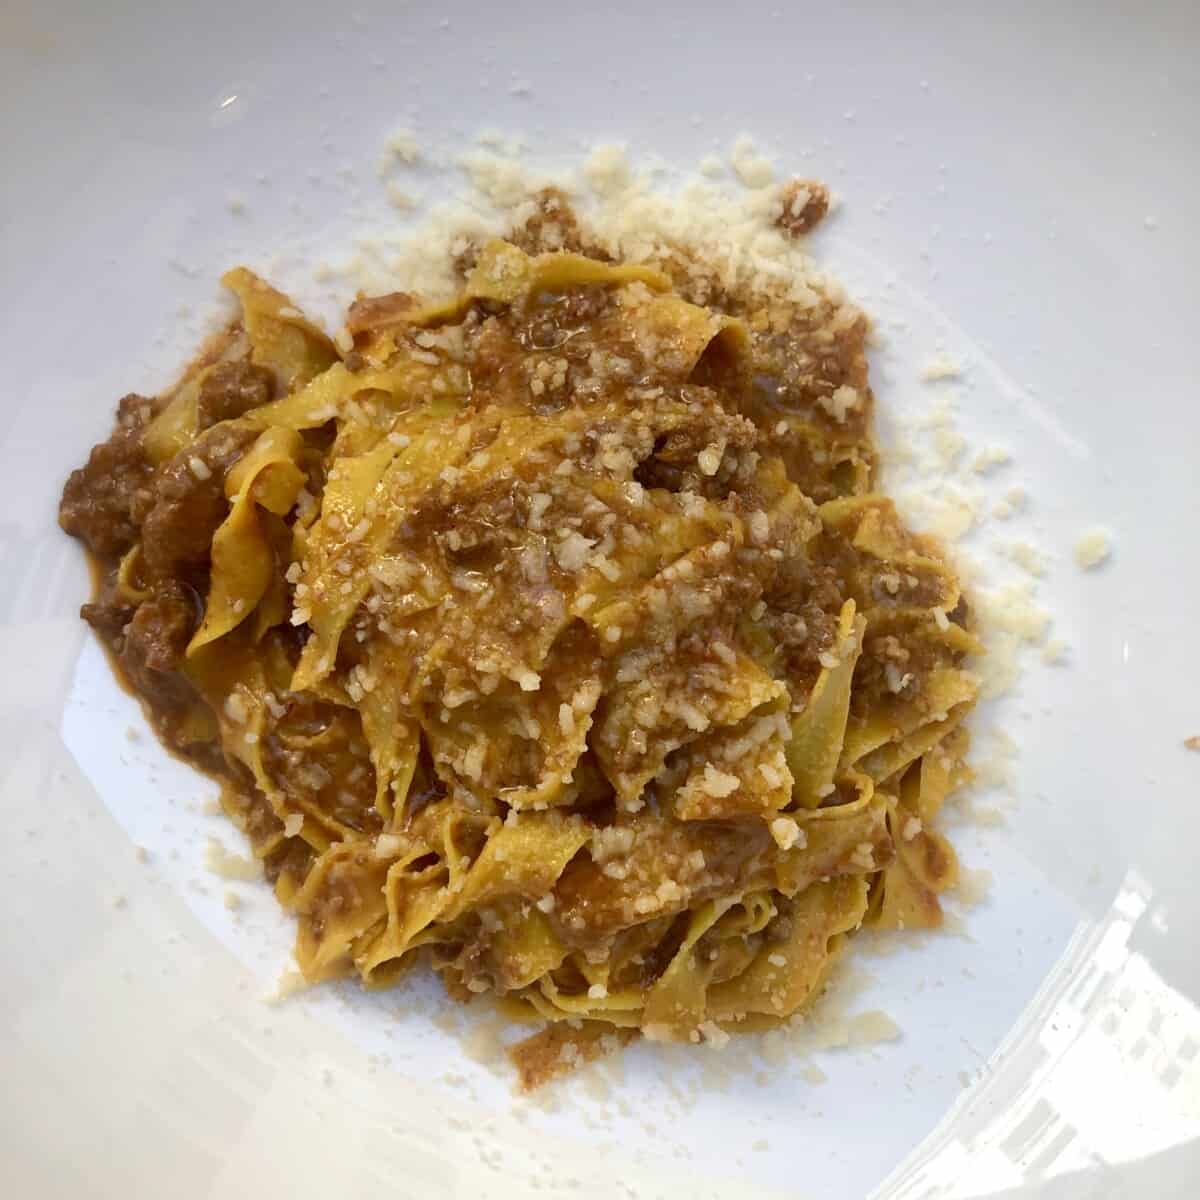 Tagliatelle alla Bolognese from a restaurant in Emilia-Romagna (the provincial birthplace of this dish)